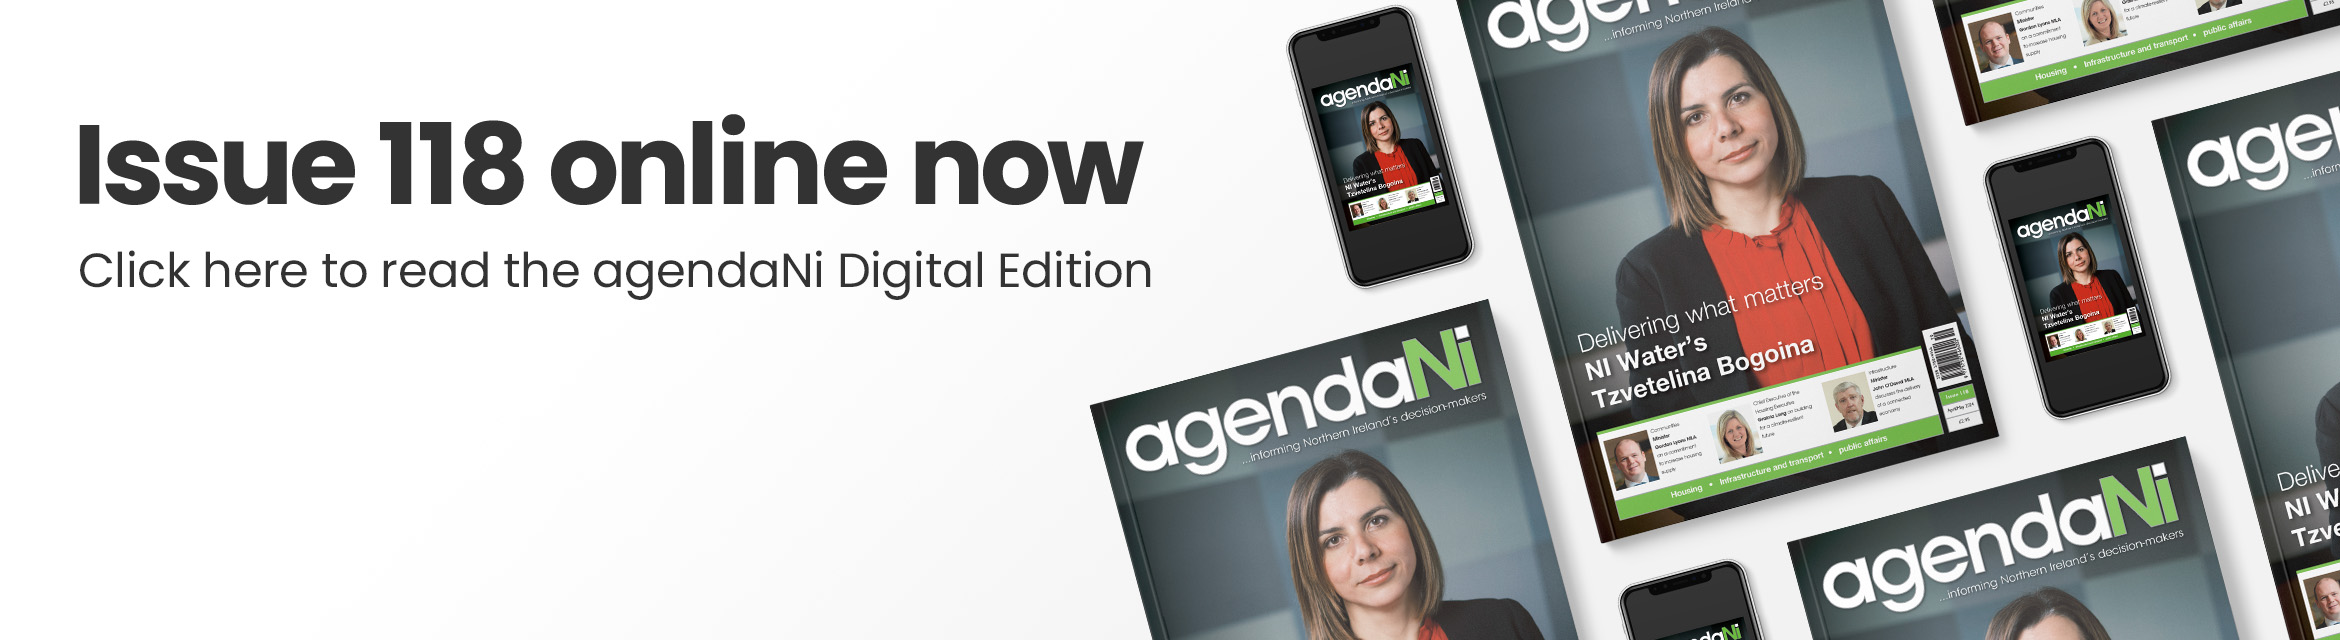 Issue 118 online now. Click here to read the agendaNi Digital Edition.